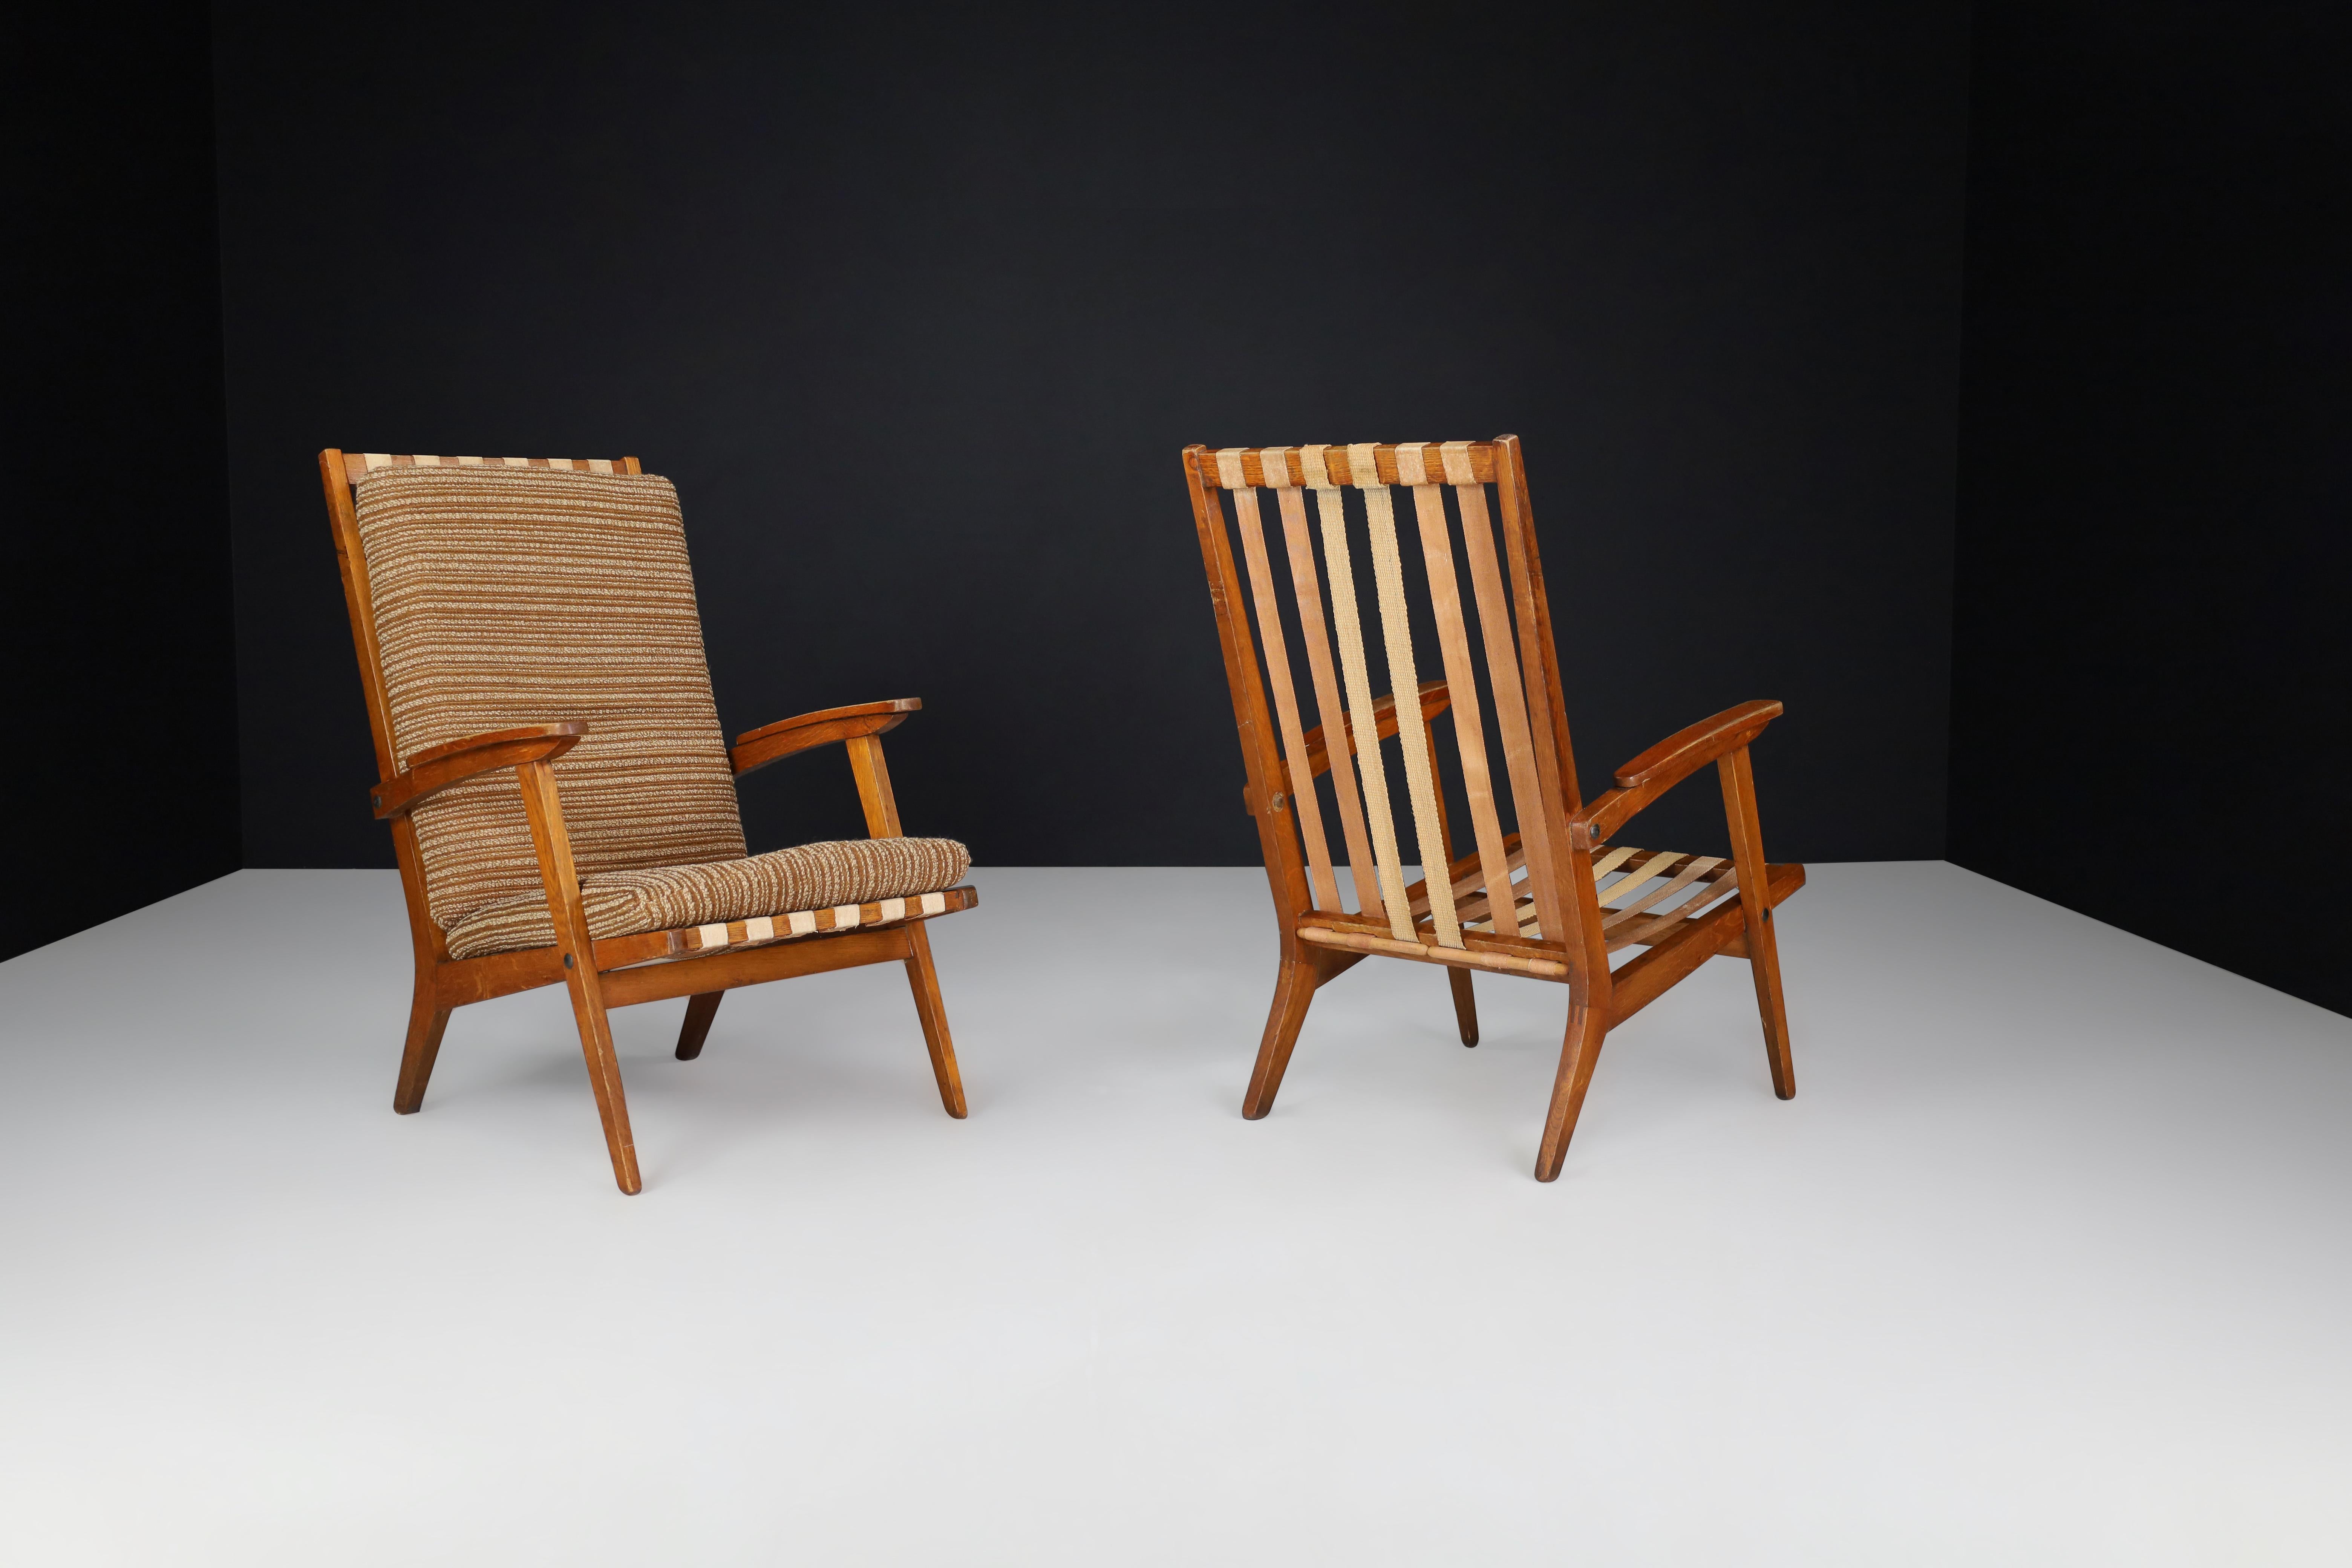 20th Century Oak Sculptural Lounge Chairs with Brown Upholstery, France, 1950s For Sale